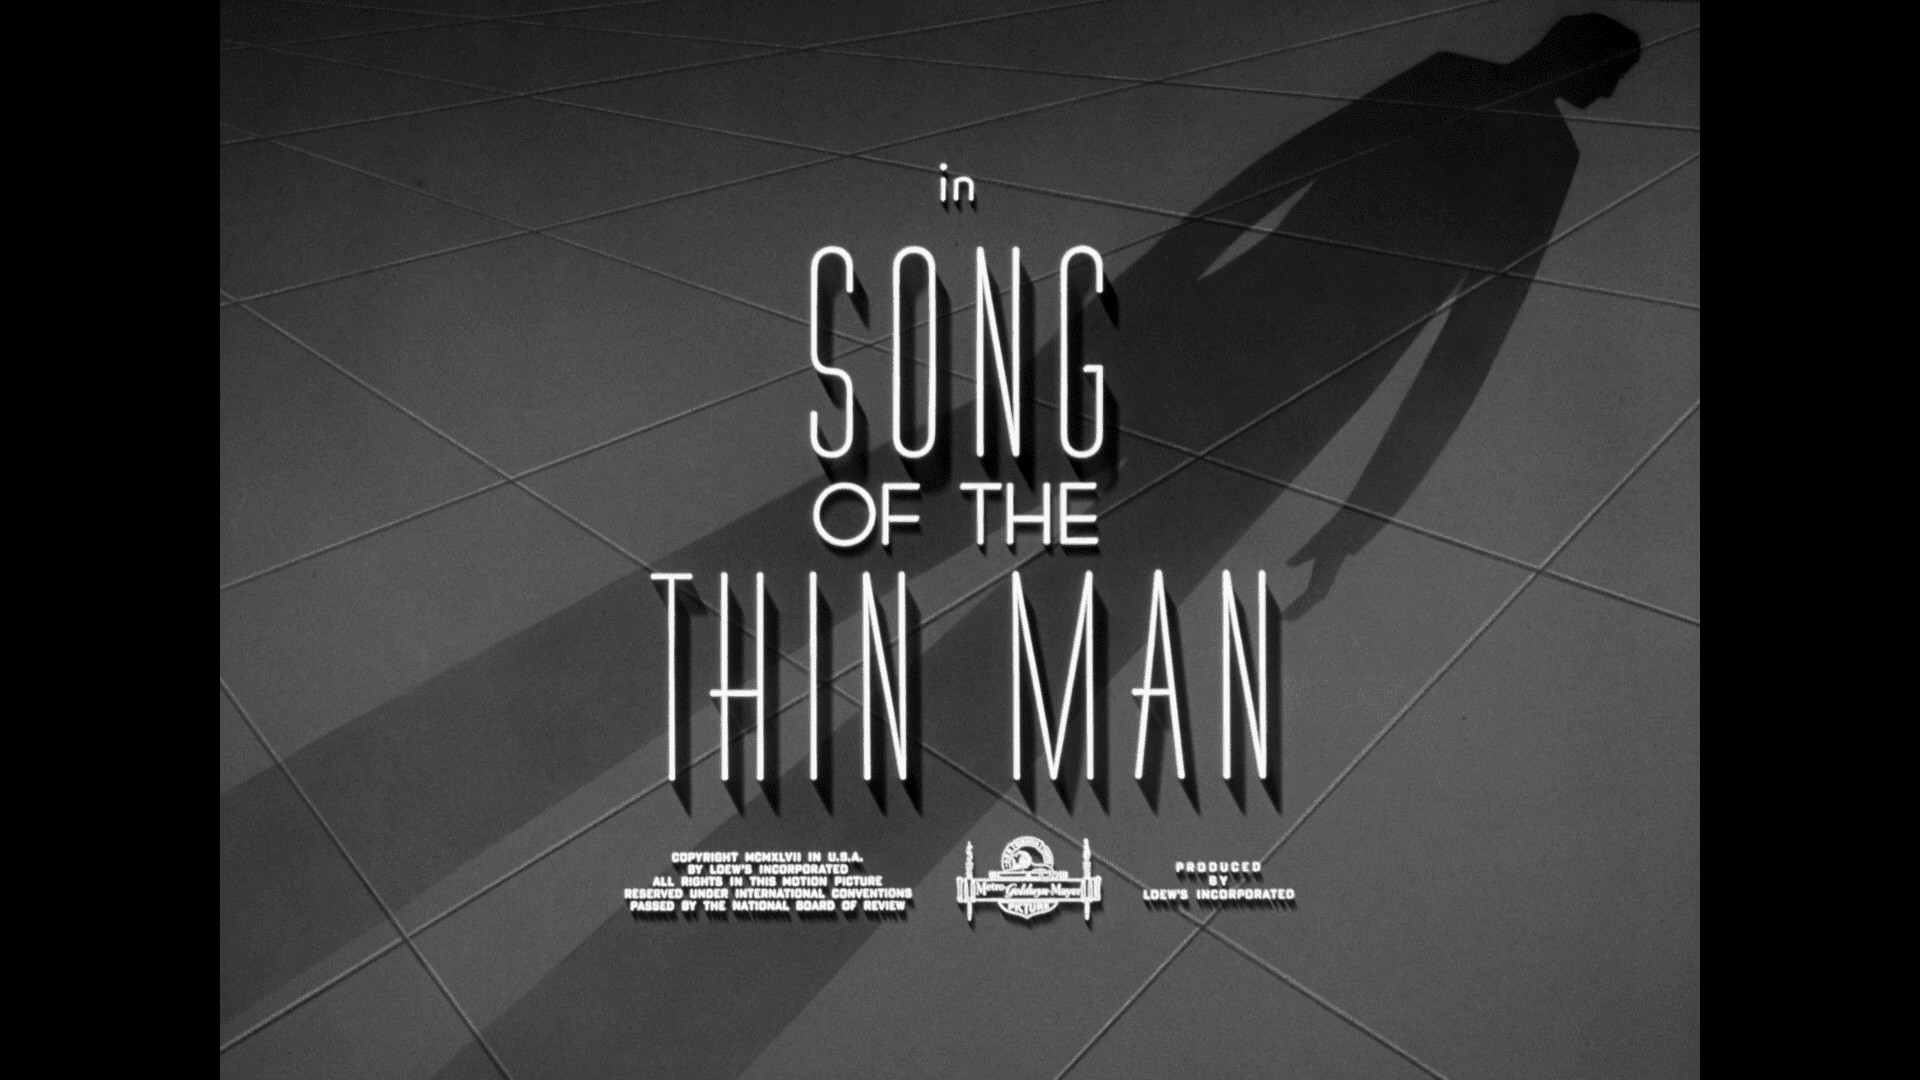 song of the thin man title